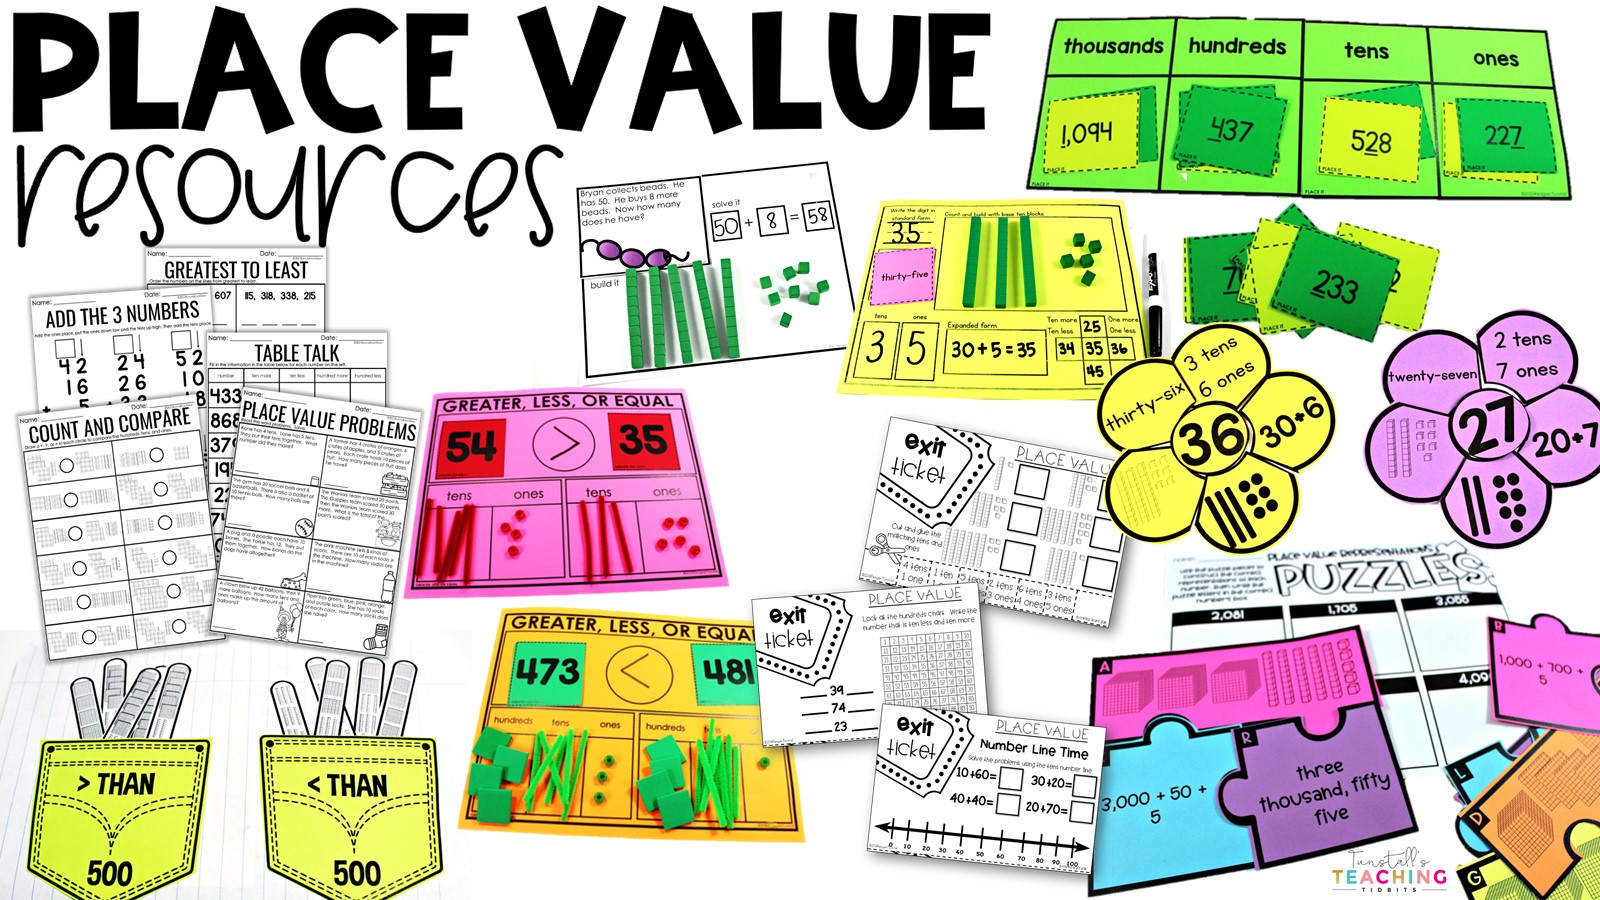 Place Value Resource Round-Up